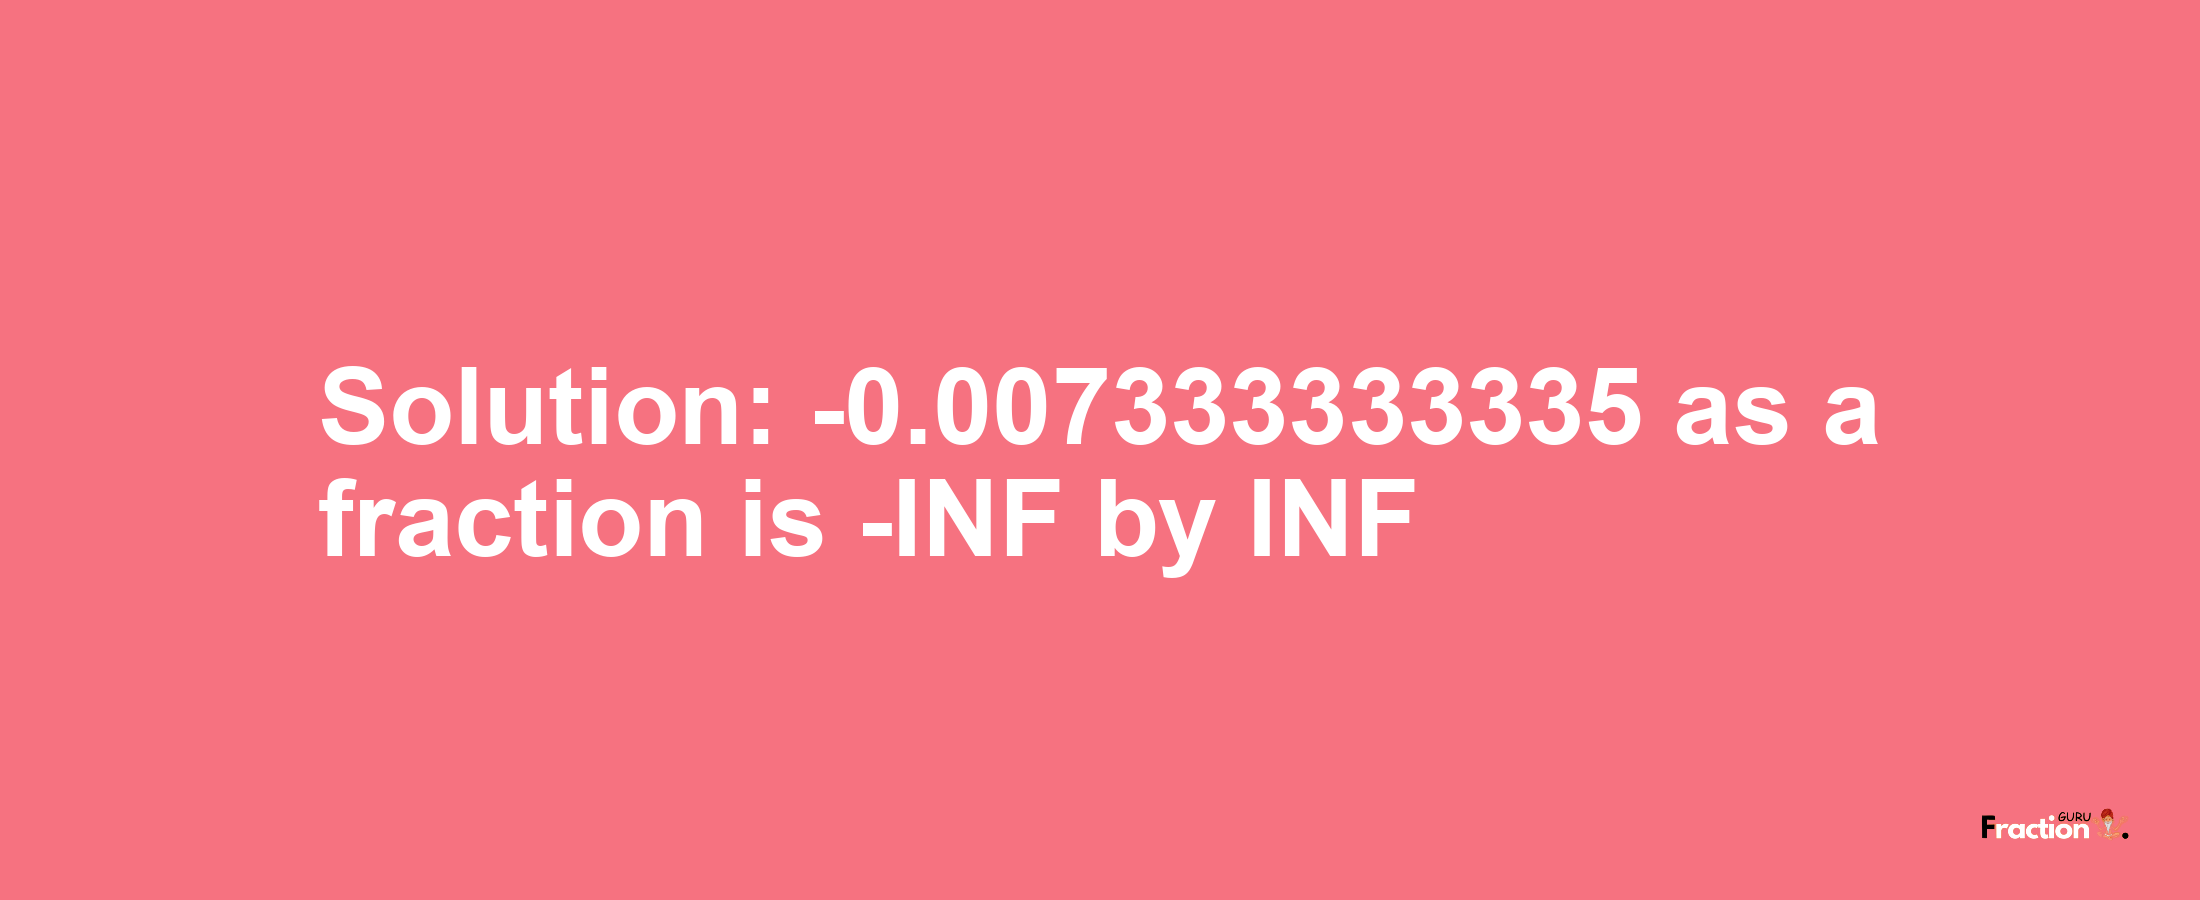 Solution:-0.007333333335 as a fraction is -INF/INF